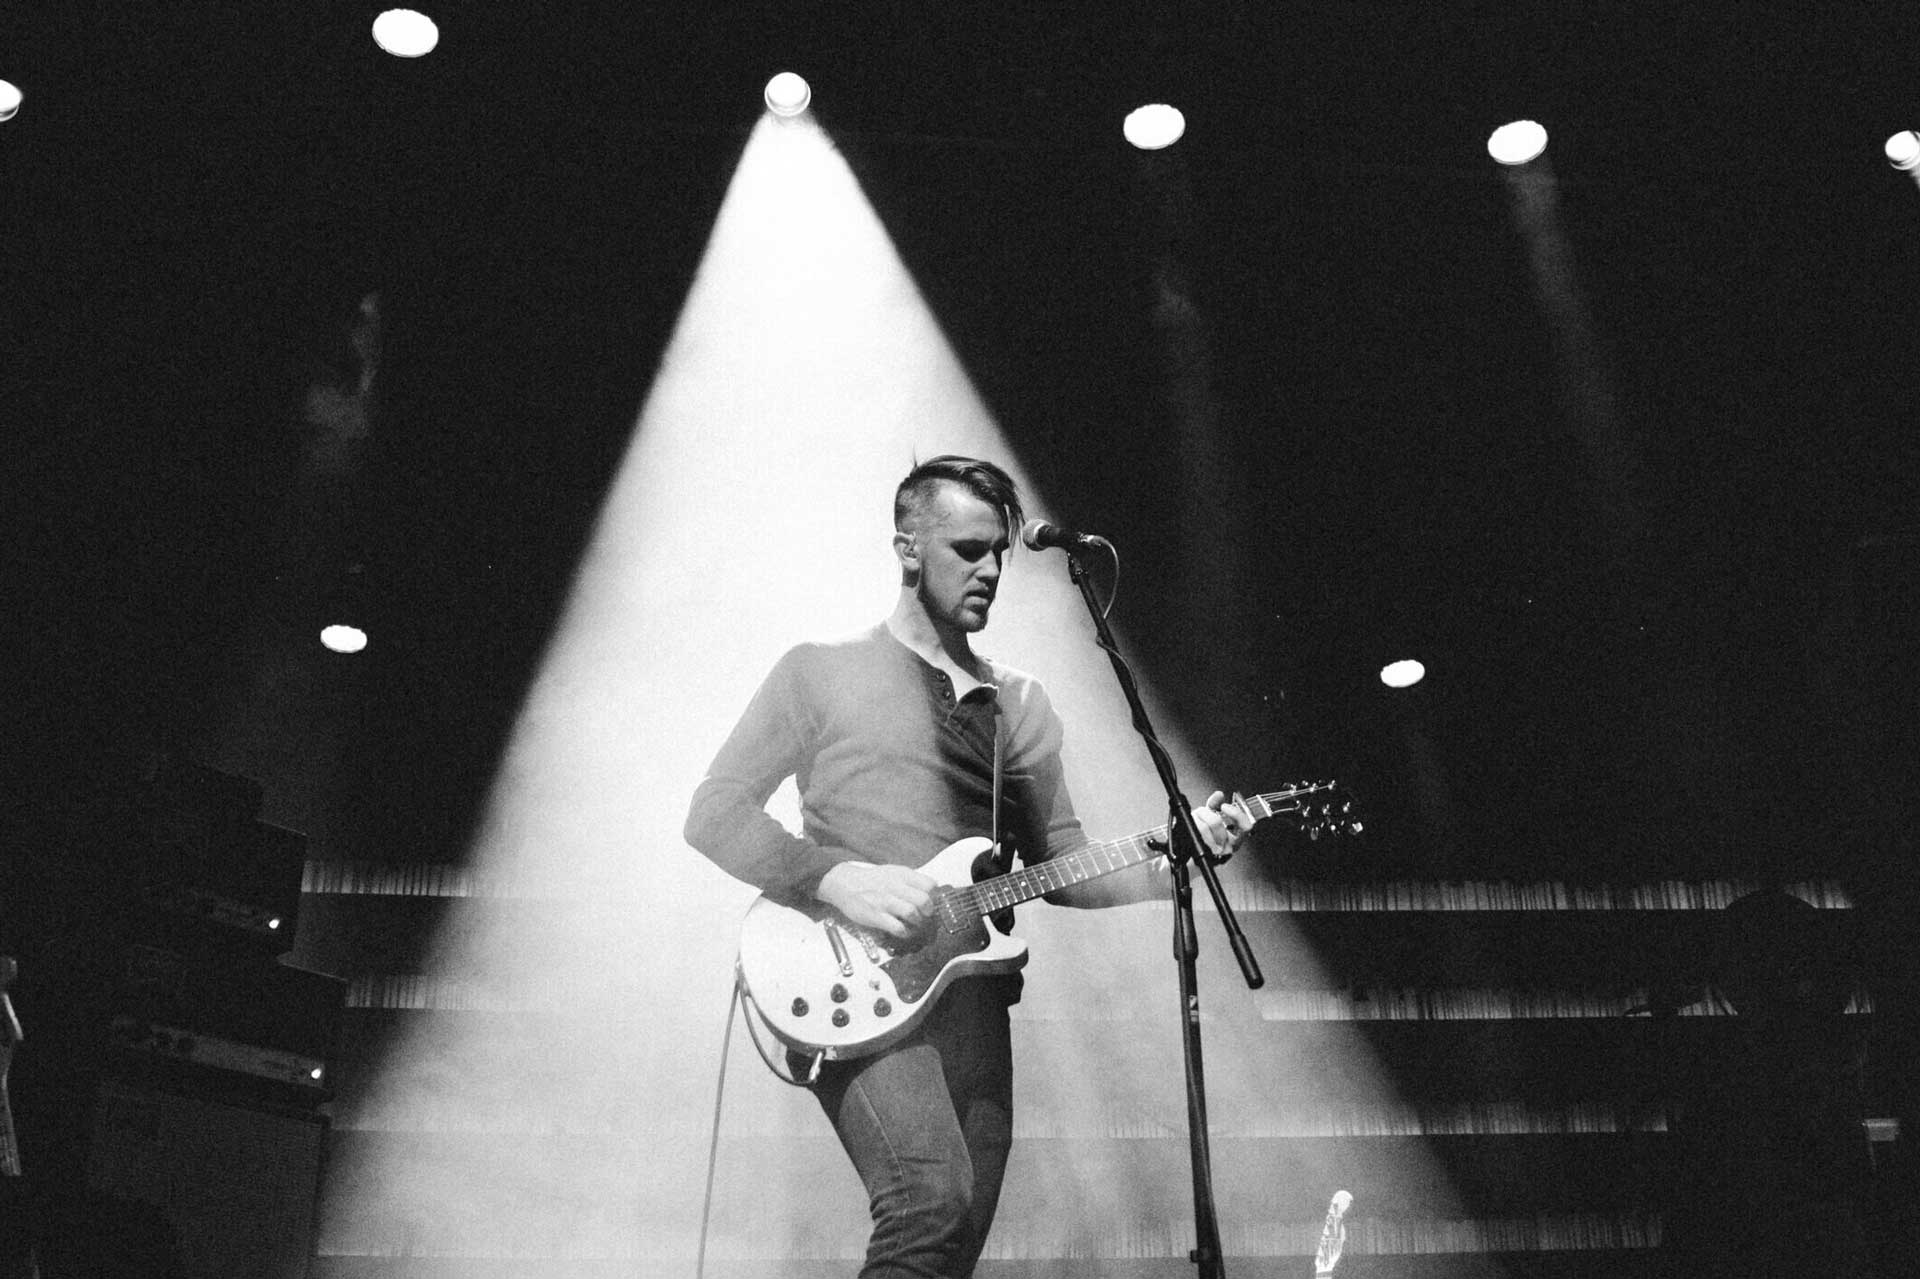 Musician Peter Ferguson on stage with guitar and microphone under spotlight